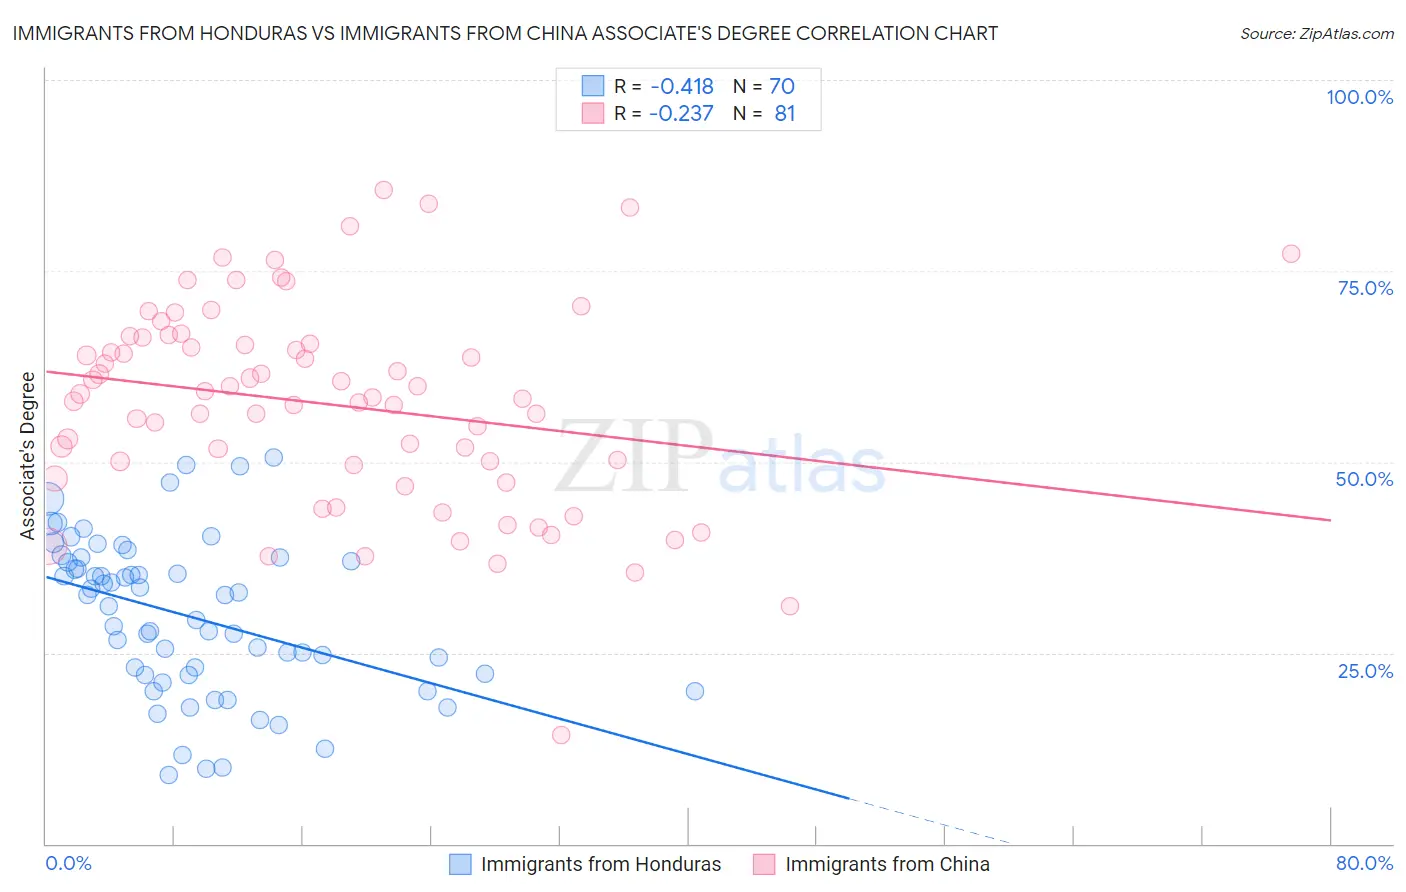 Immigrants from Honduras vs Immigrants from China Associate's Degree